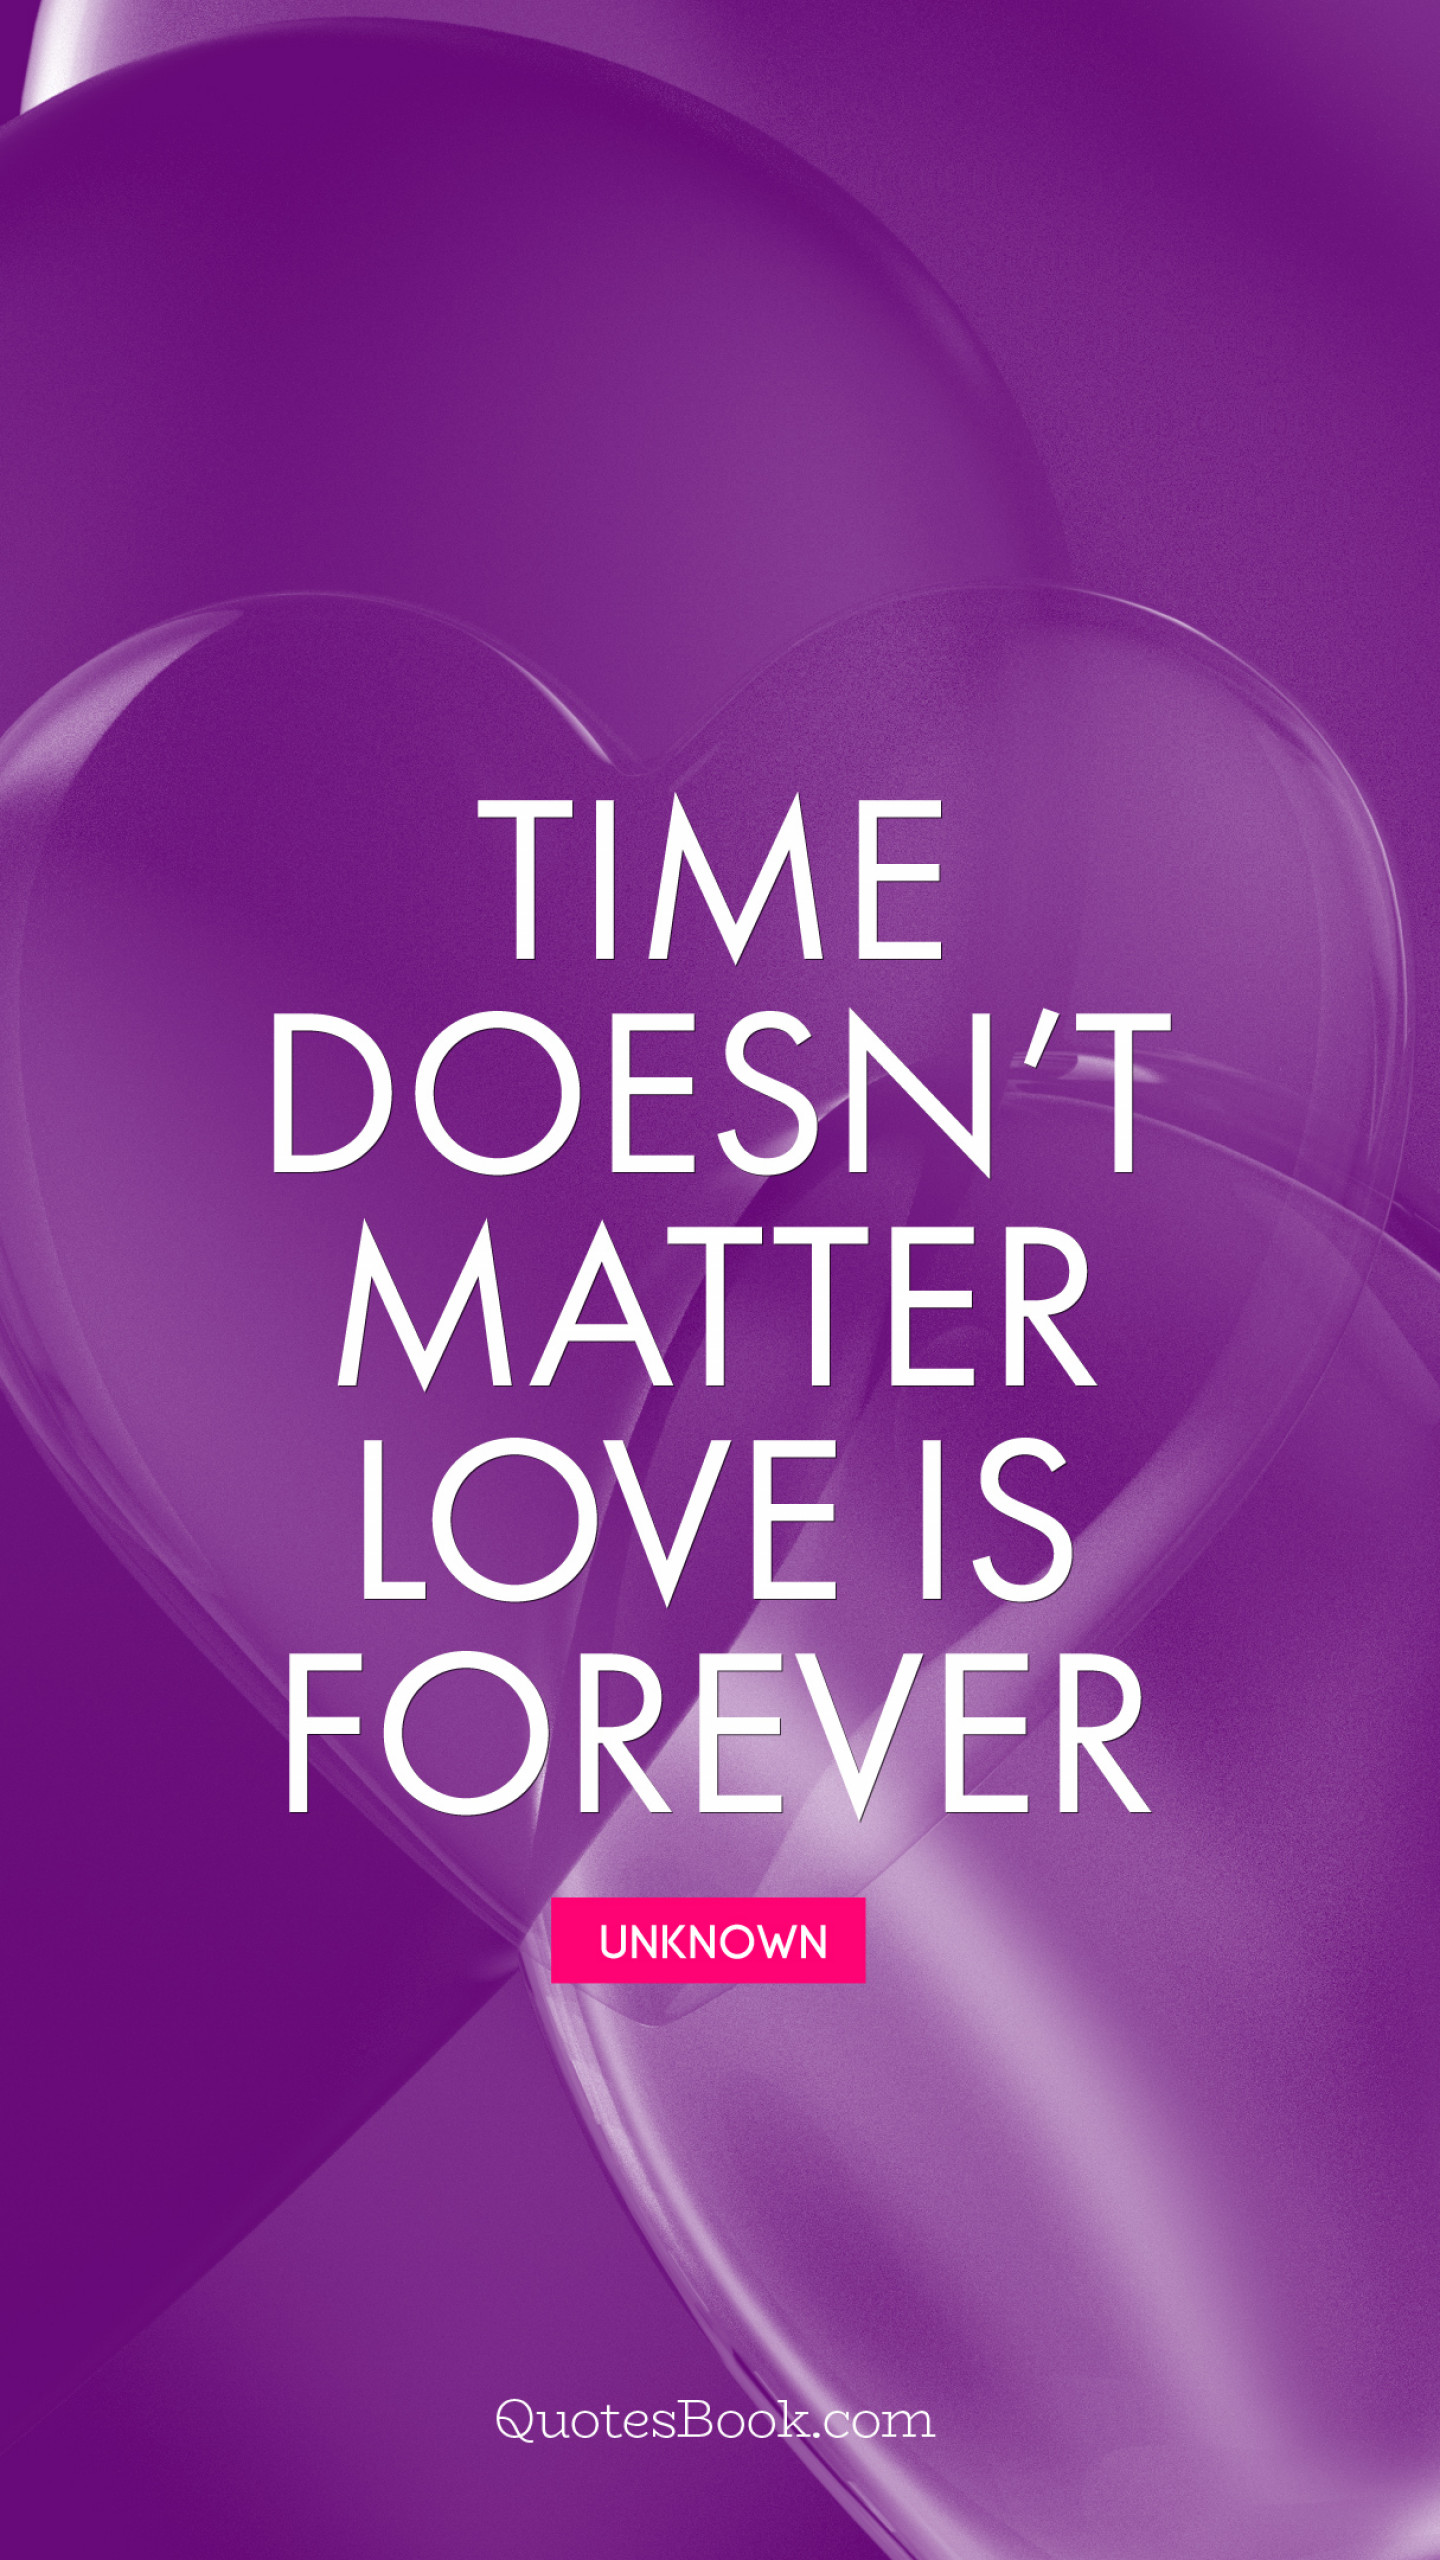 Download e-book This love is forever Free